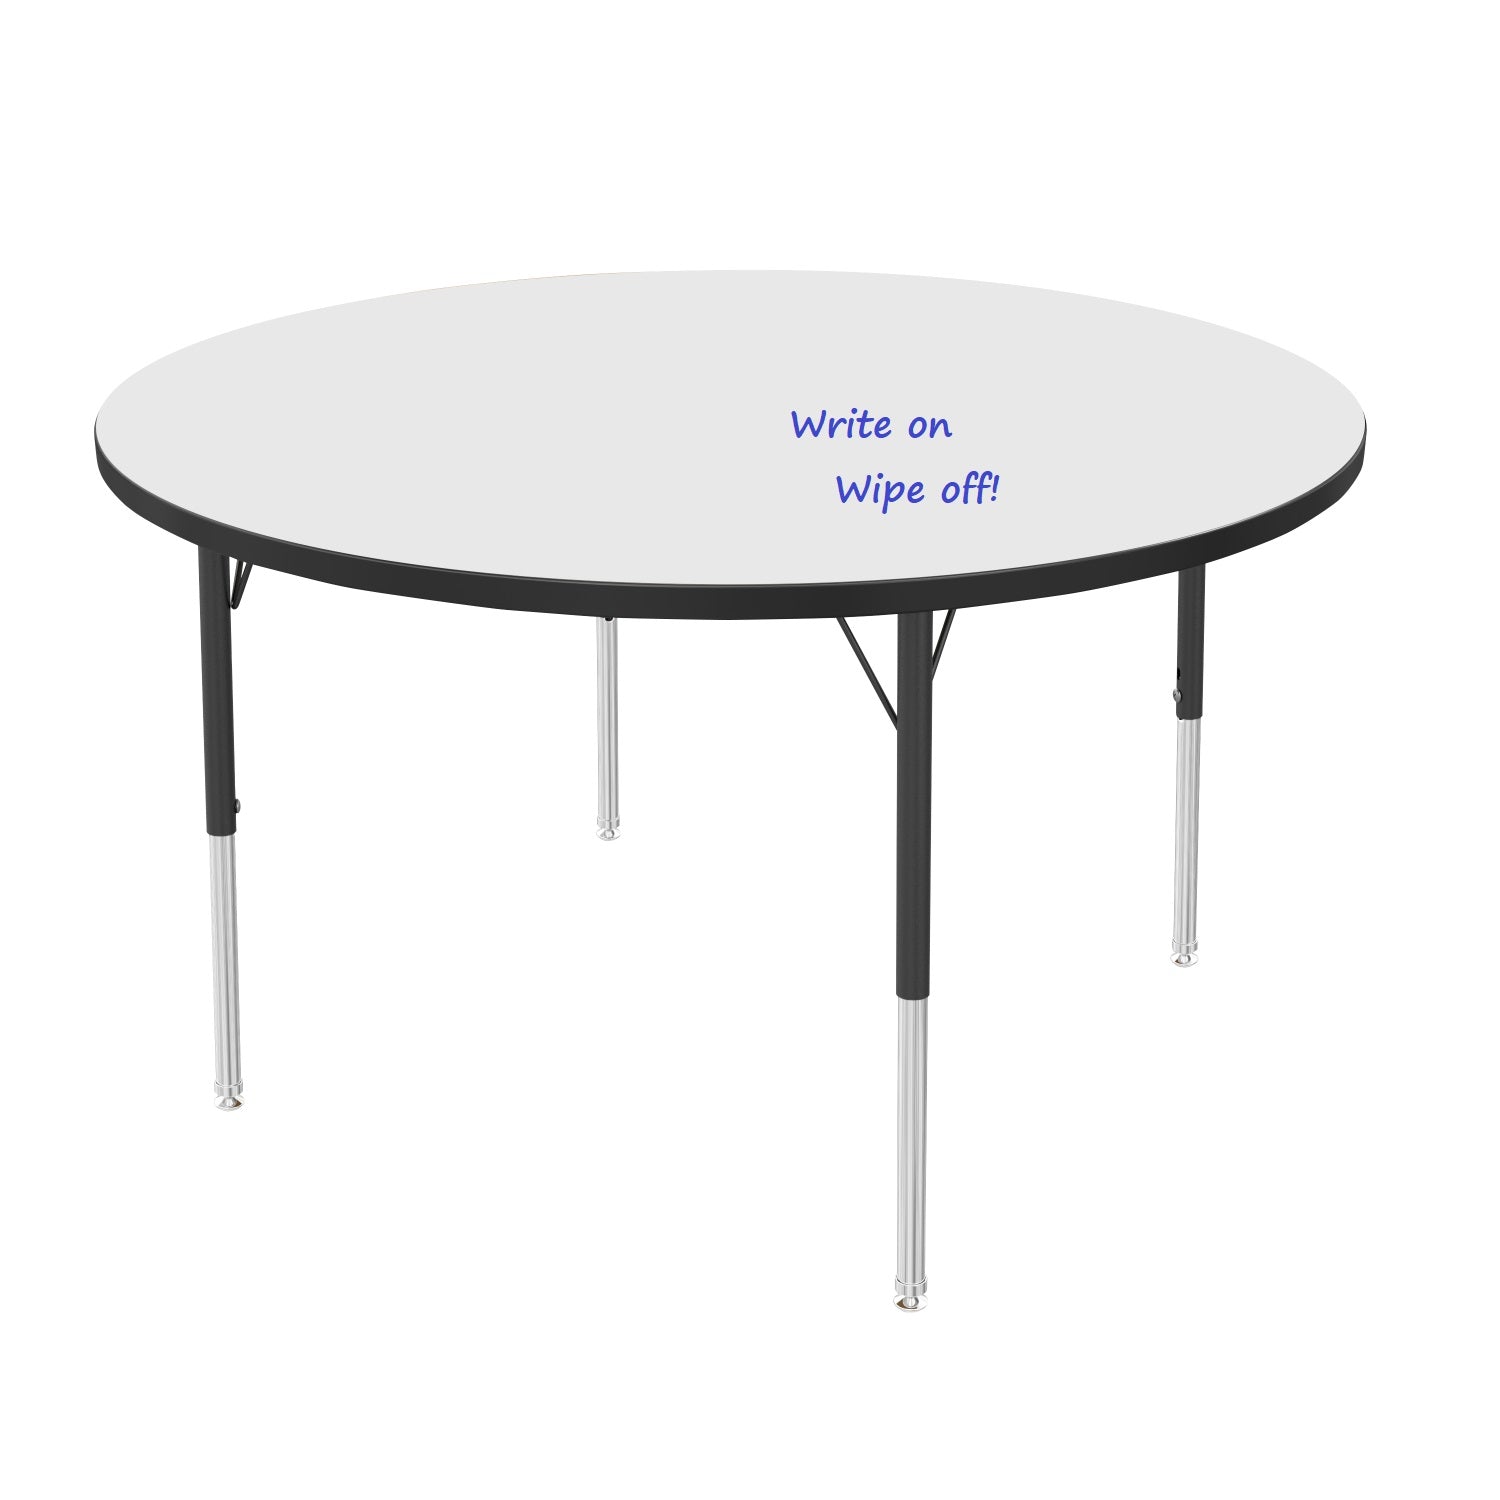 MG Series Adjustable Height Activity Table with White Dry Erase Markerboard Top, 42" Round